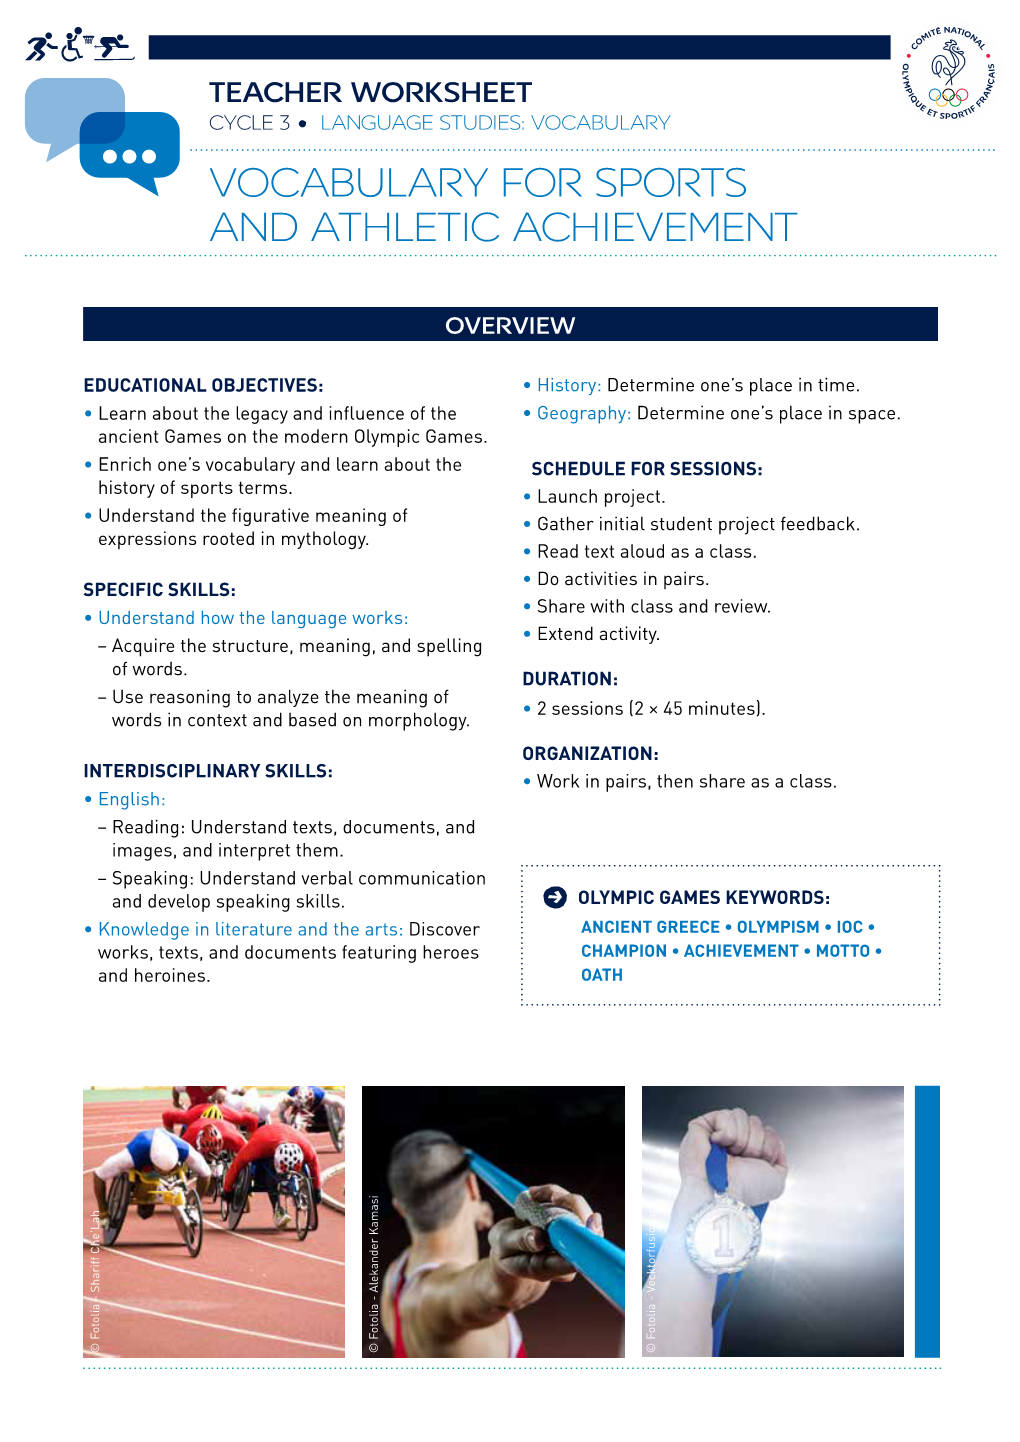 Vocabulary for Sports and Athletic Achievement